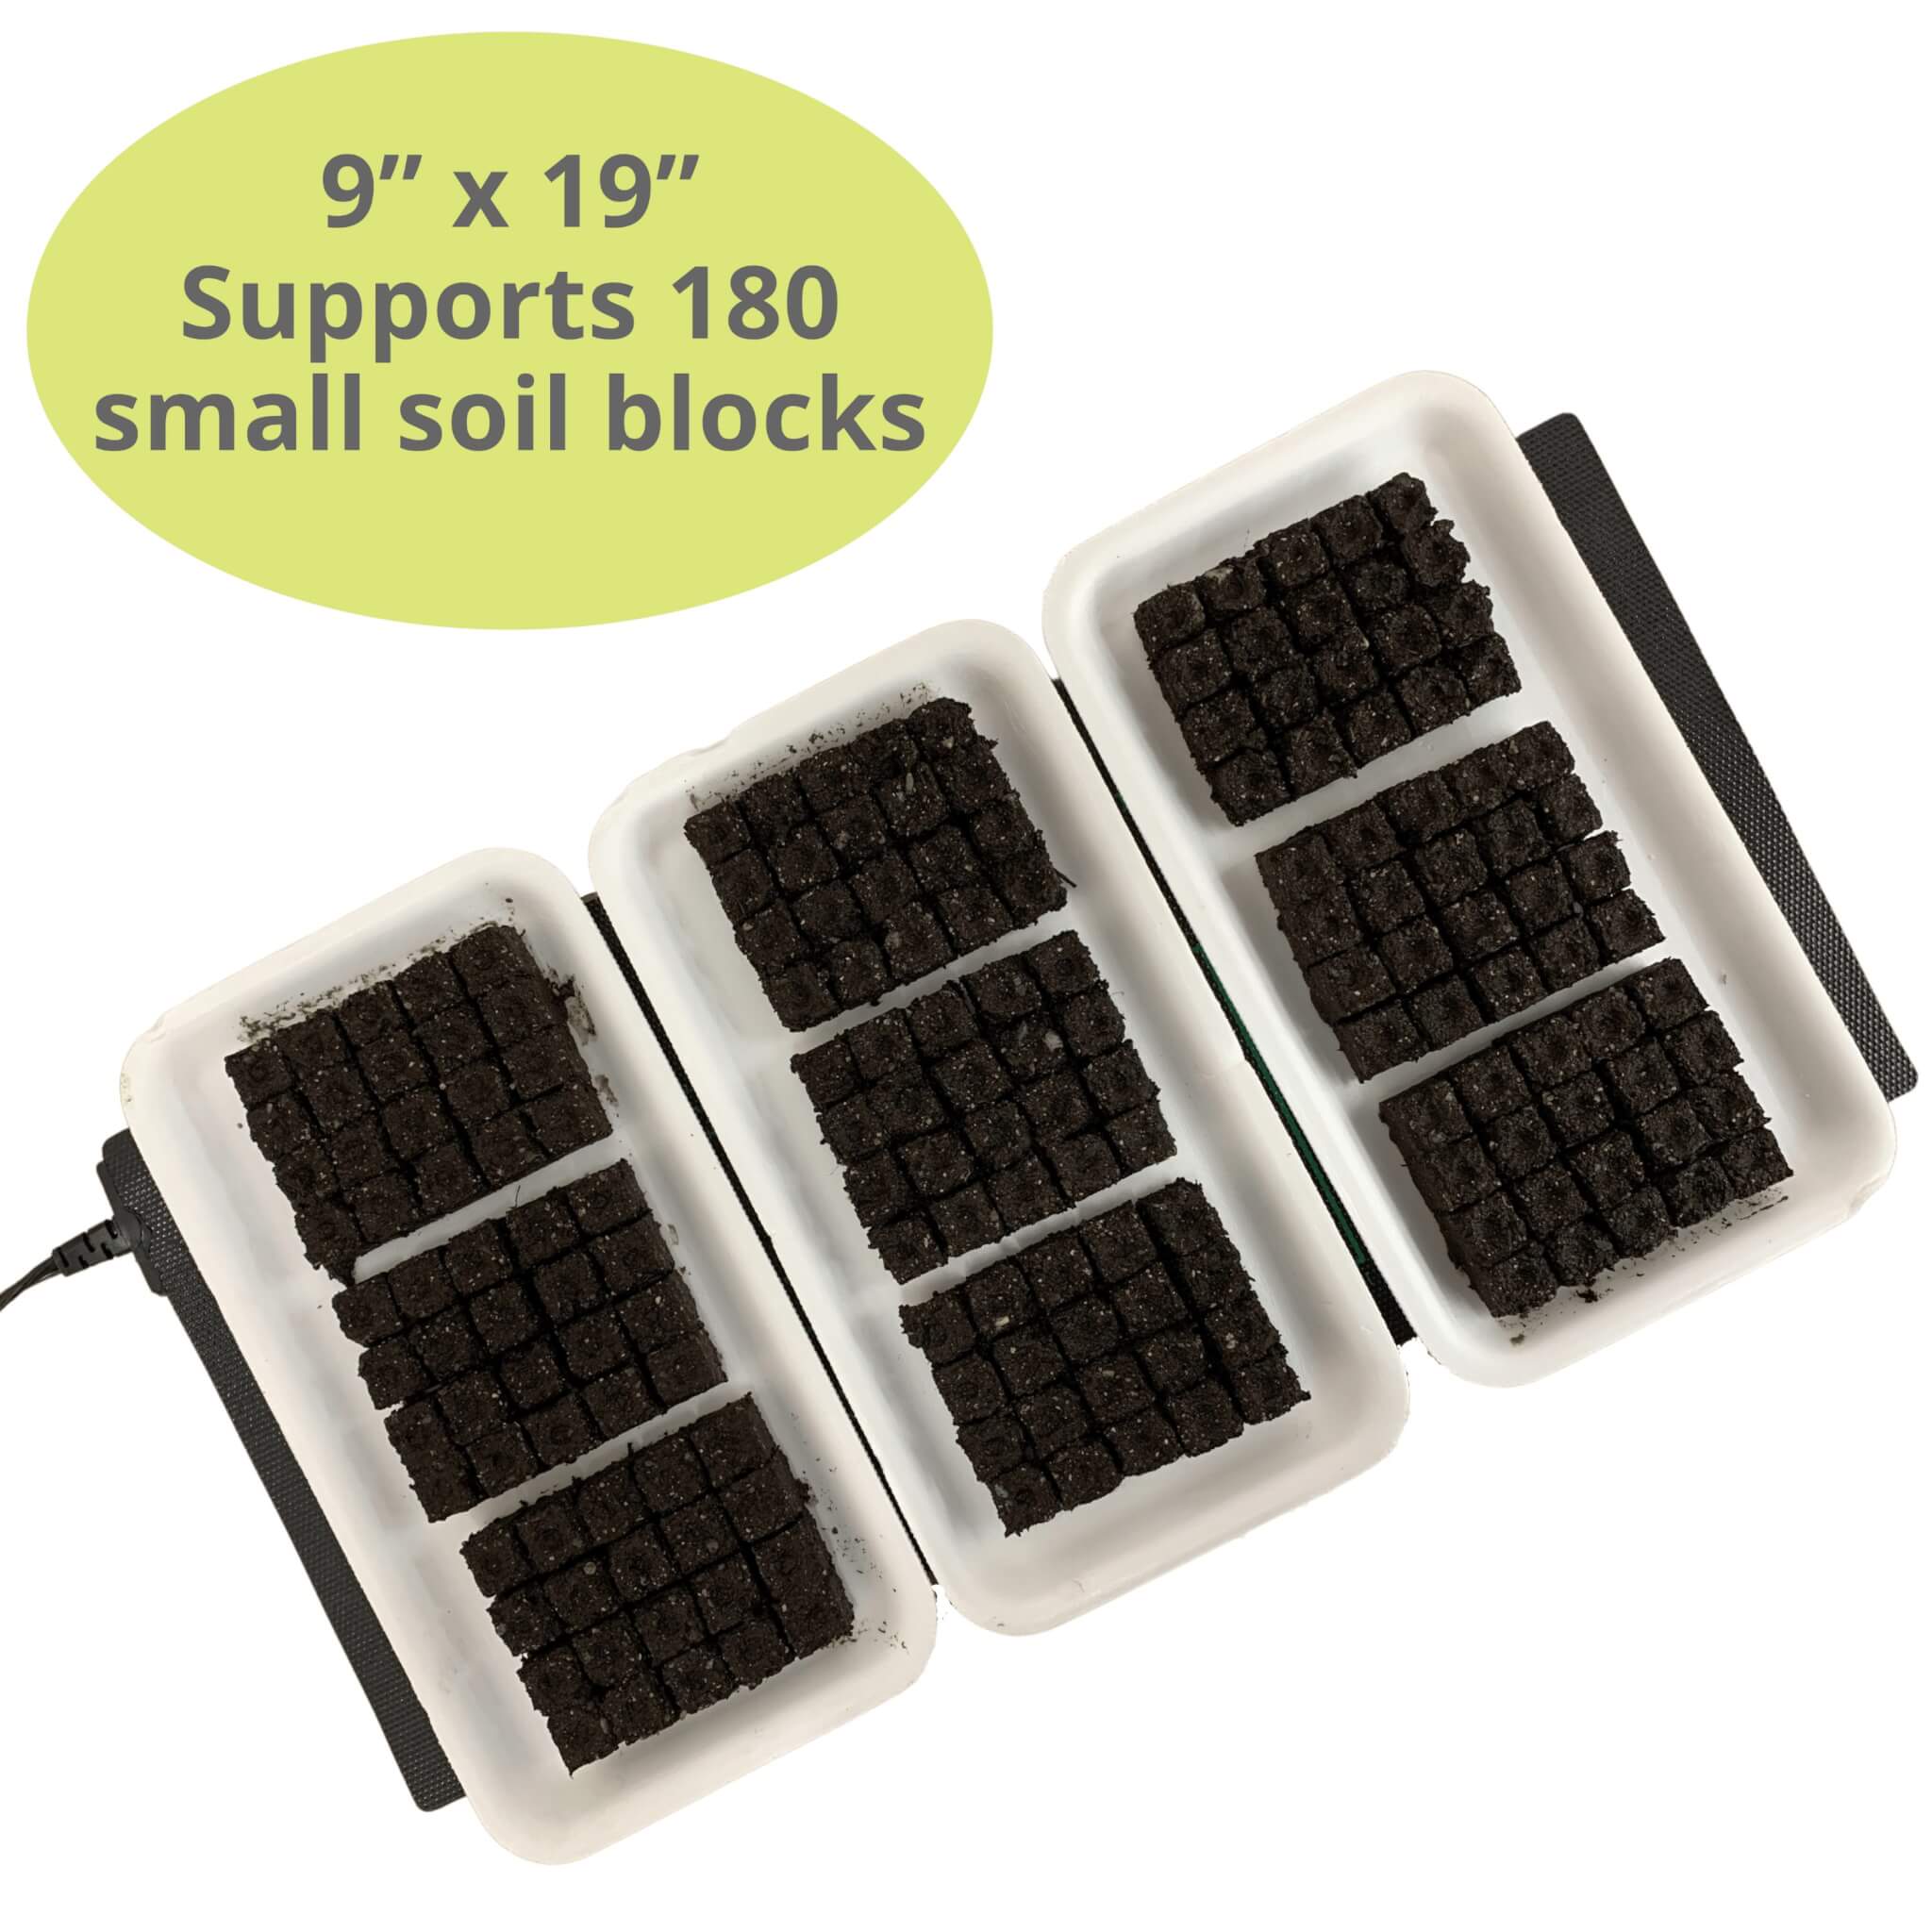 Heat Mats: Are They Really Necessary for Sowing Seeds? - Laidback